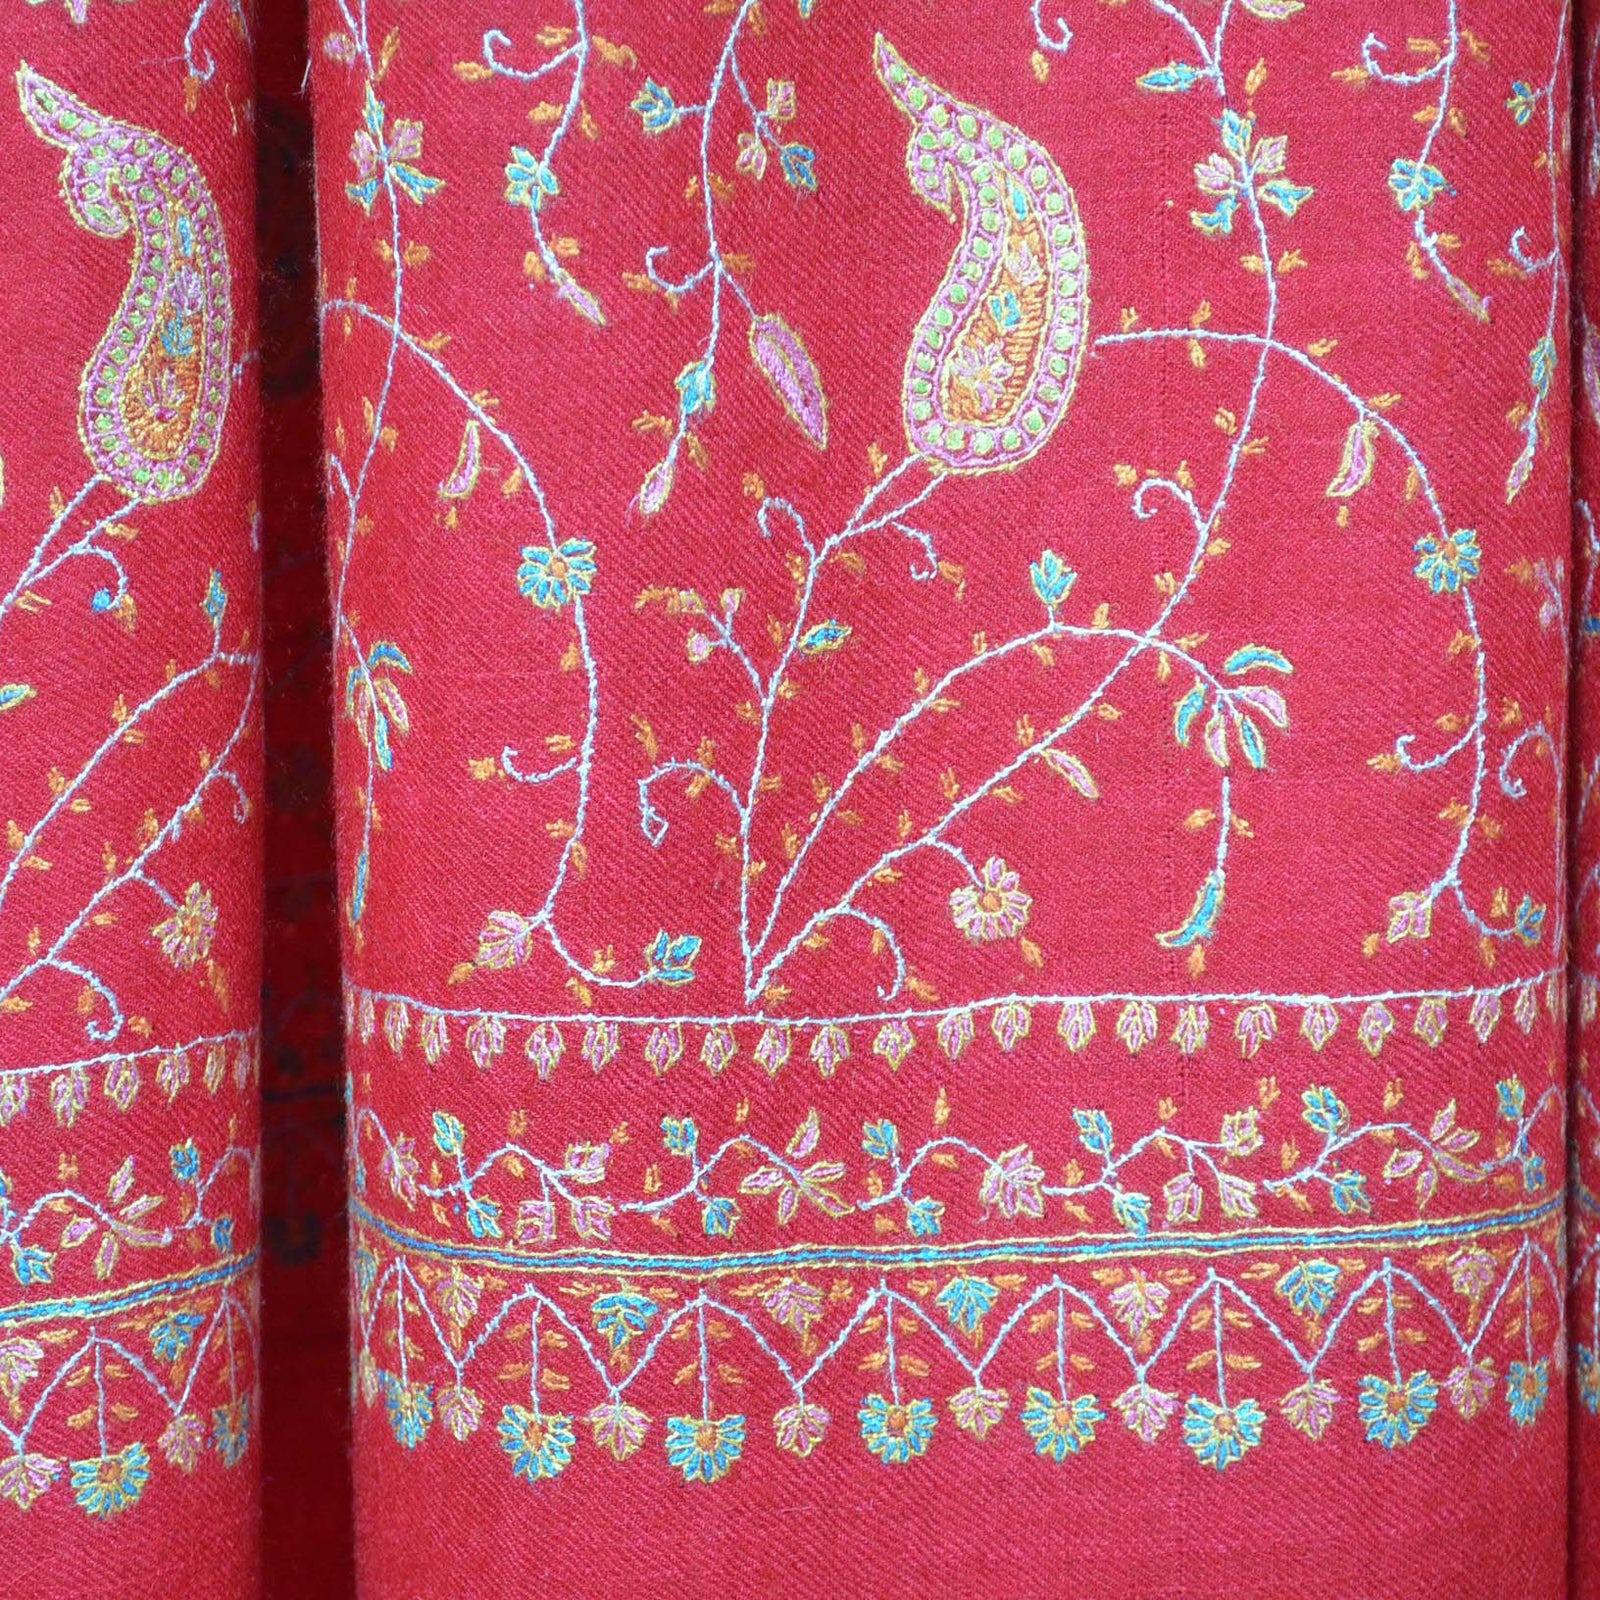 Travel Wrap with Kashmir Sozni Embroidery all over the Pashmina Base